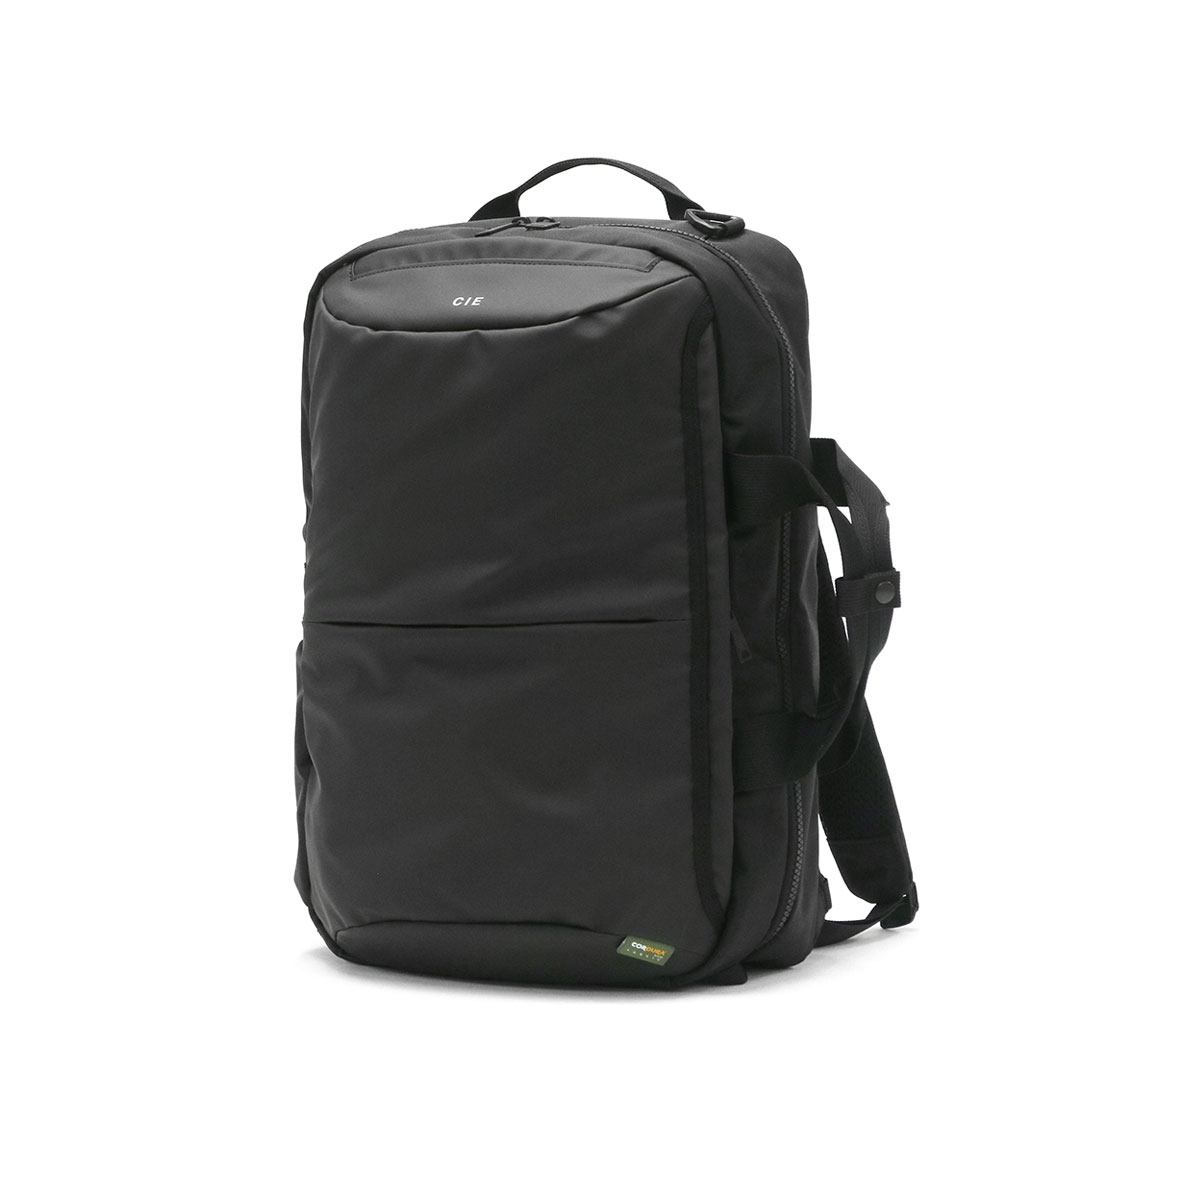 CIE リュック シー LEAP 2WAY BACKPACK-S リュックサック 軽量 防水 耐久 ...